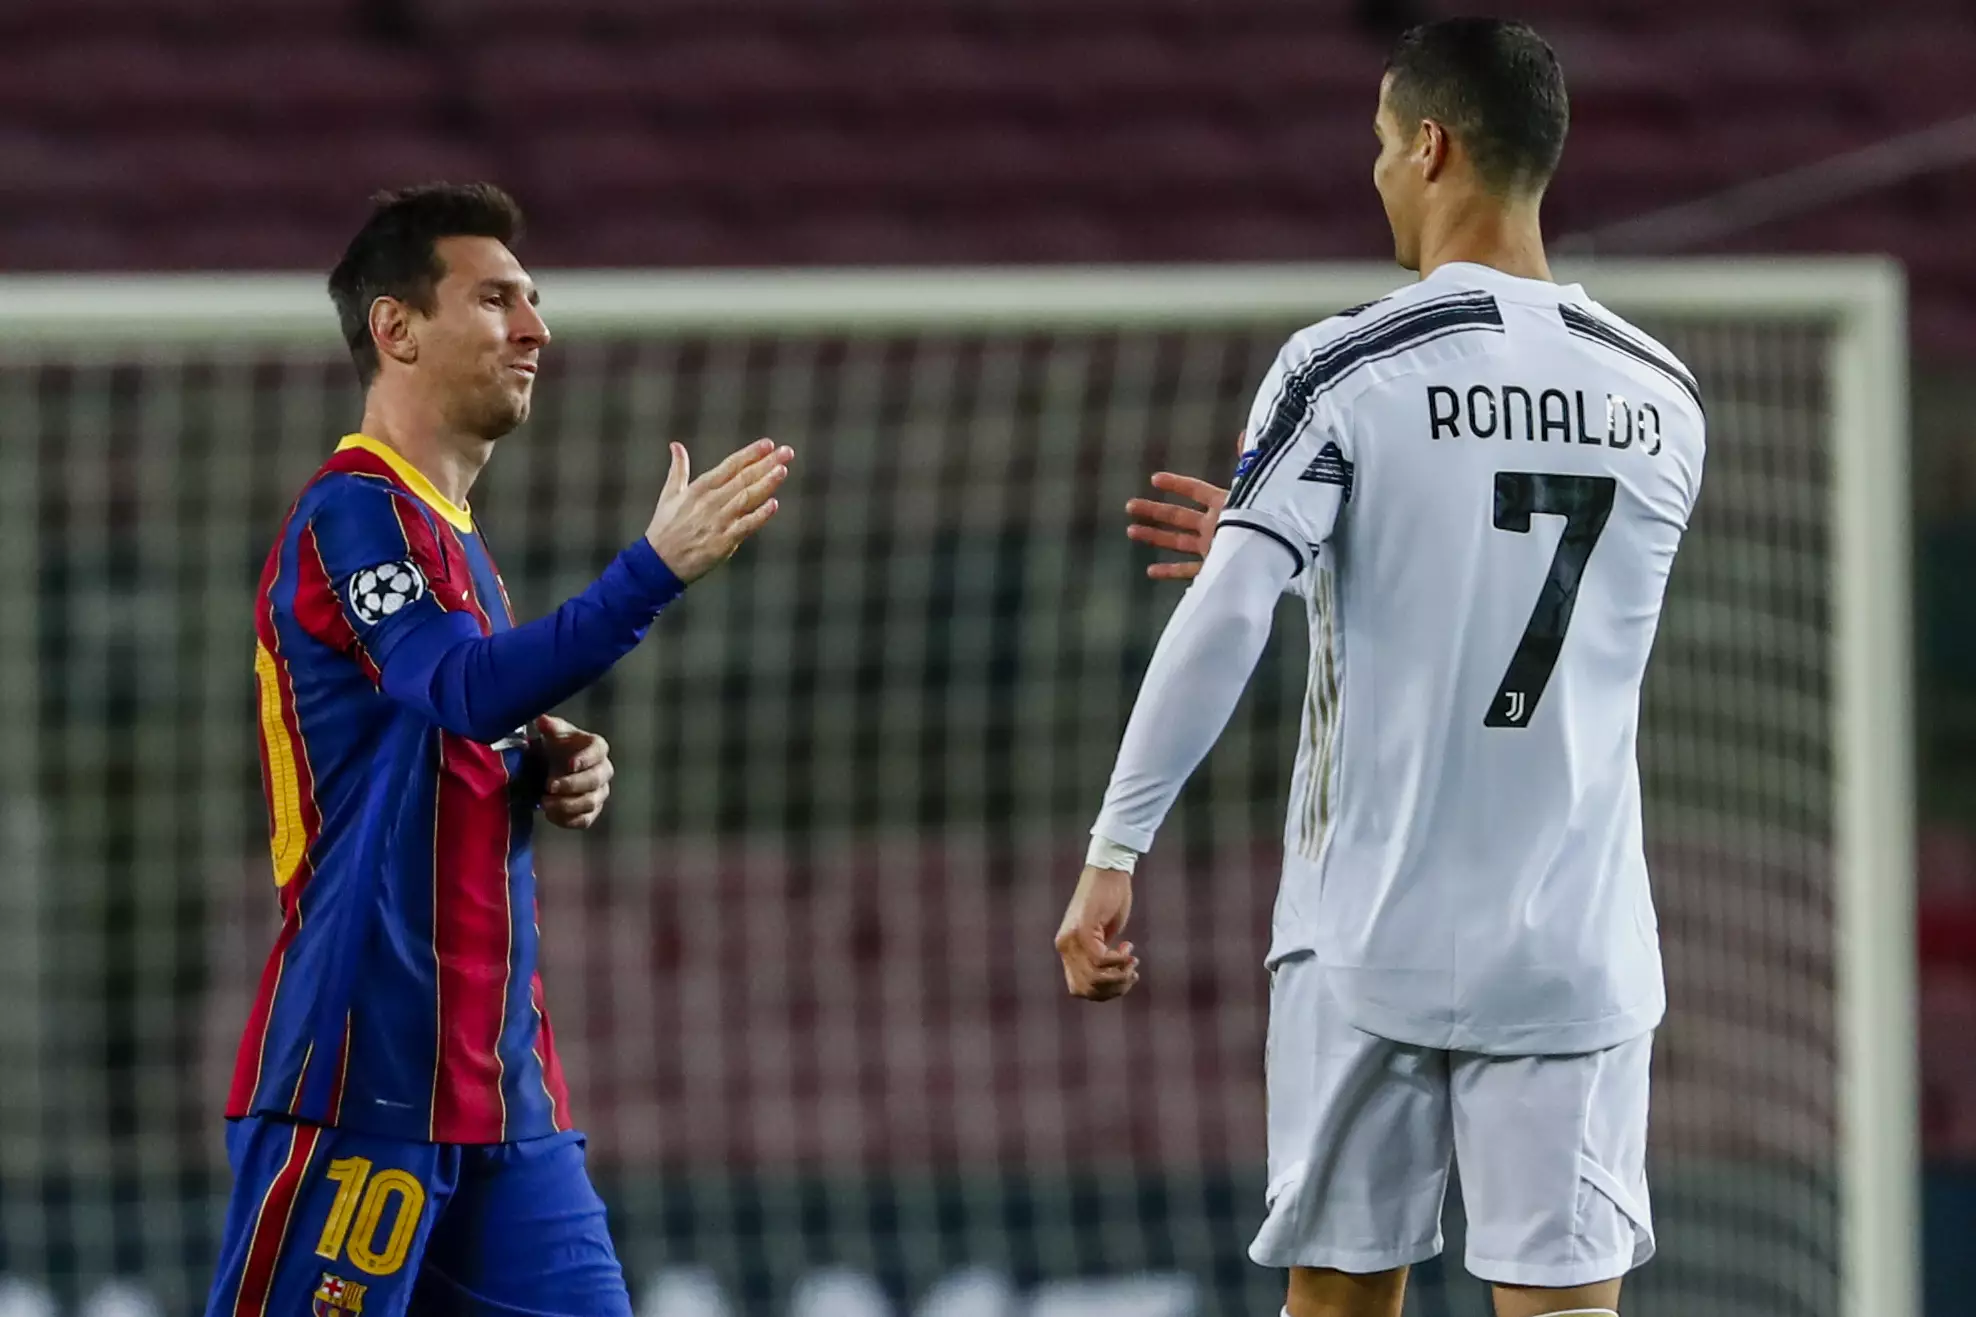 Ronaldo and Messi met in the Champions League recently. Image: PA Images